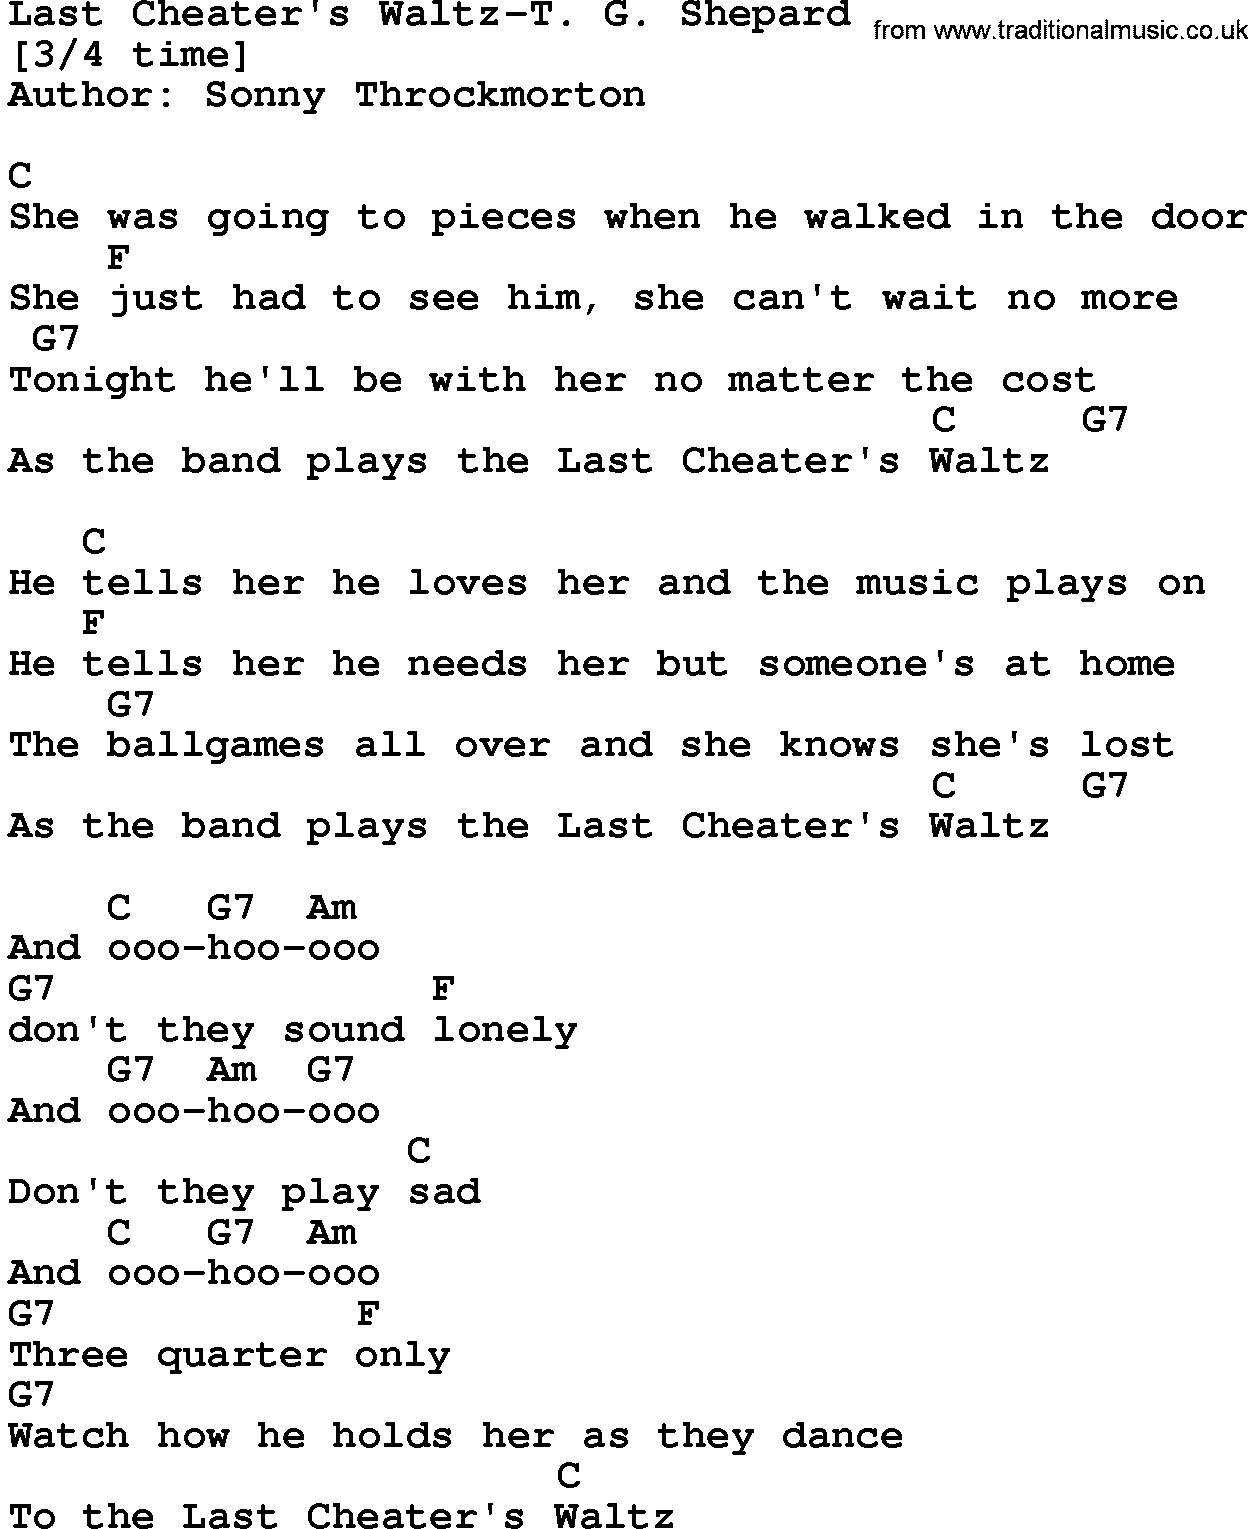 Country music song: Last Cheater's Waltz-T G Shepard lyrics and chords